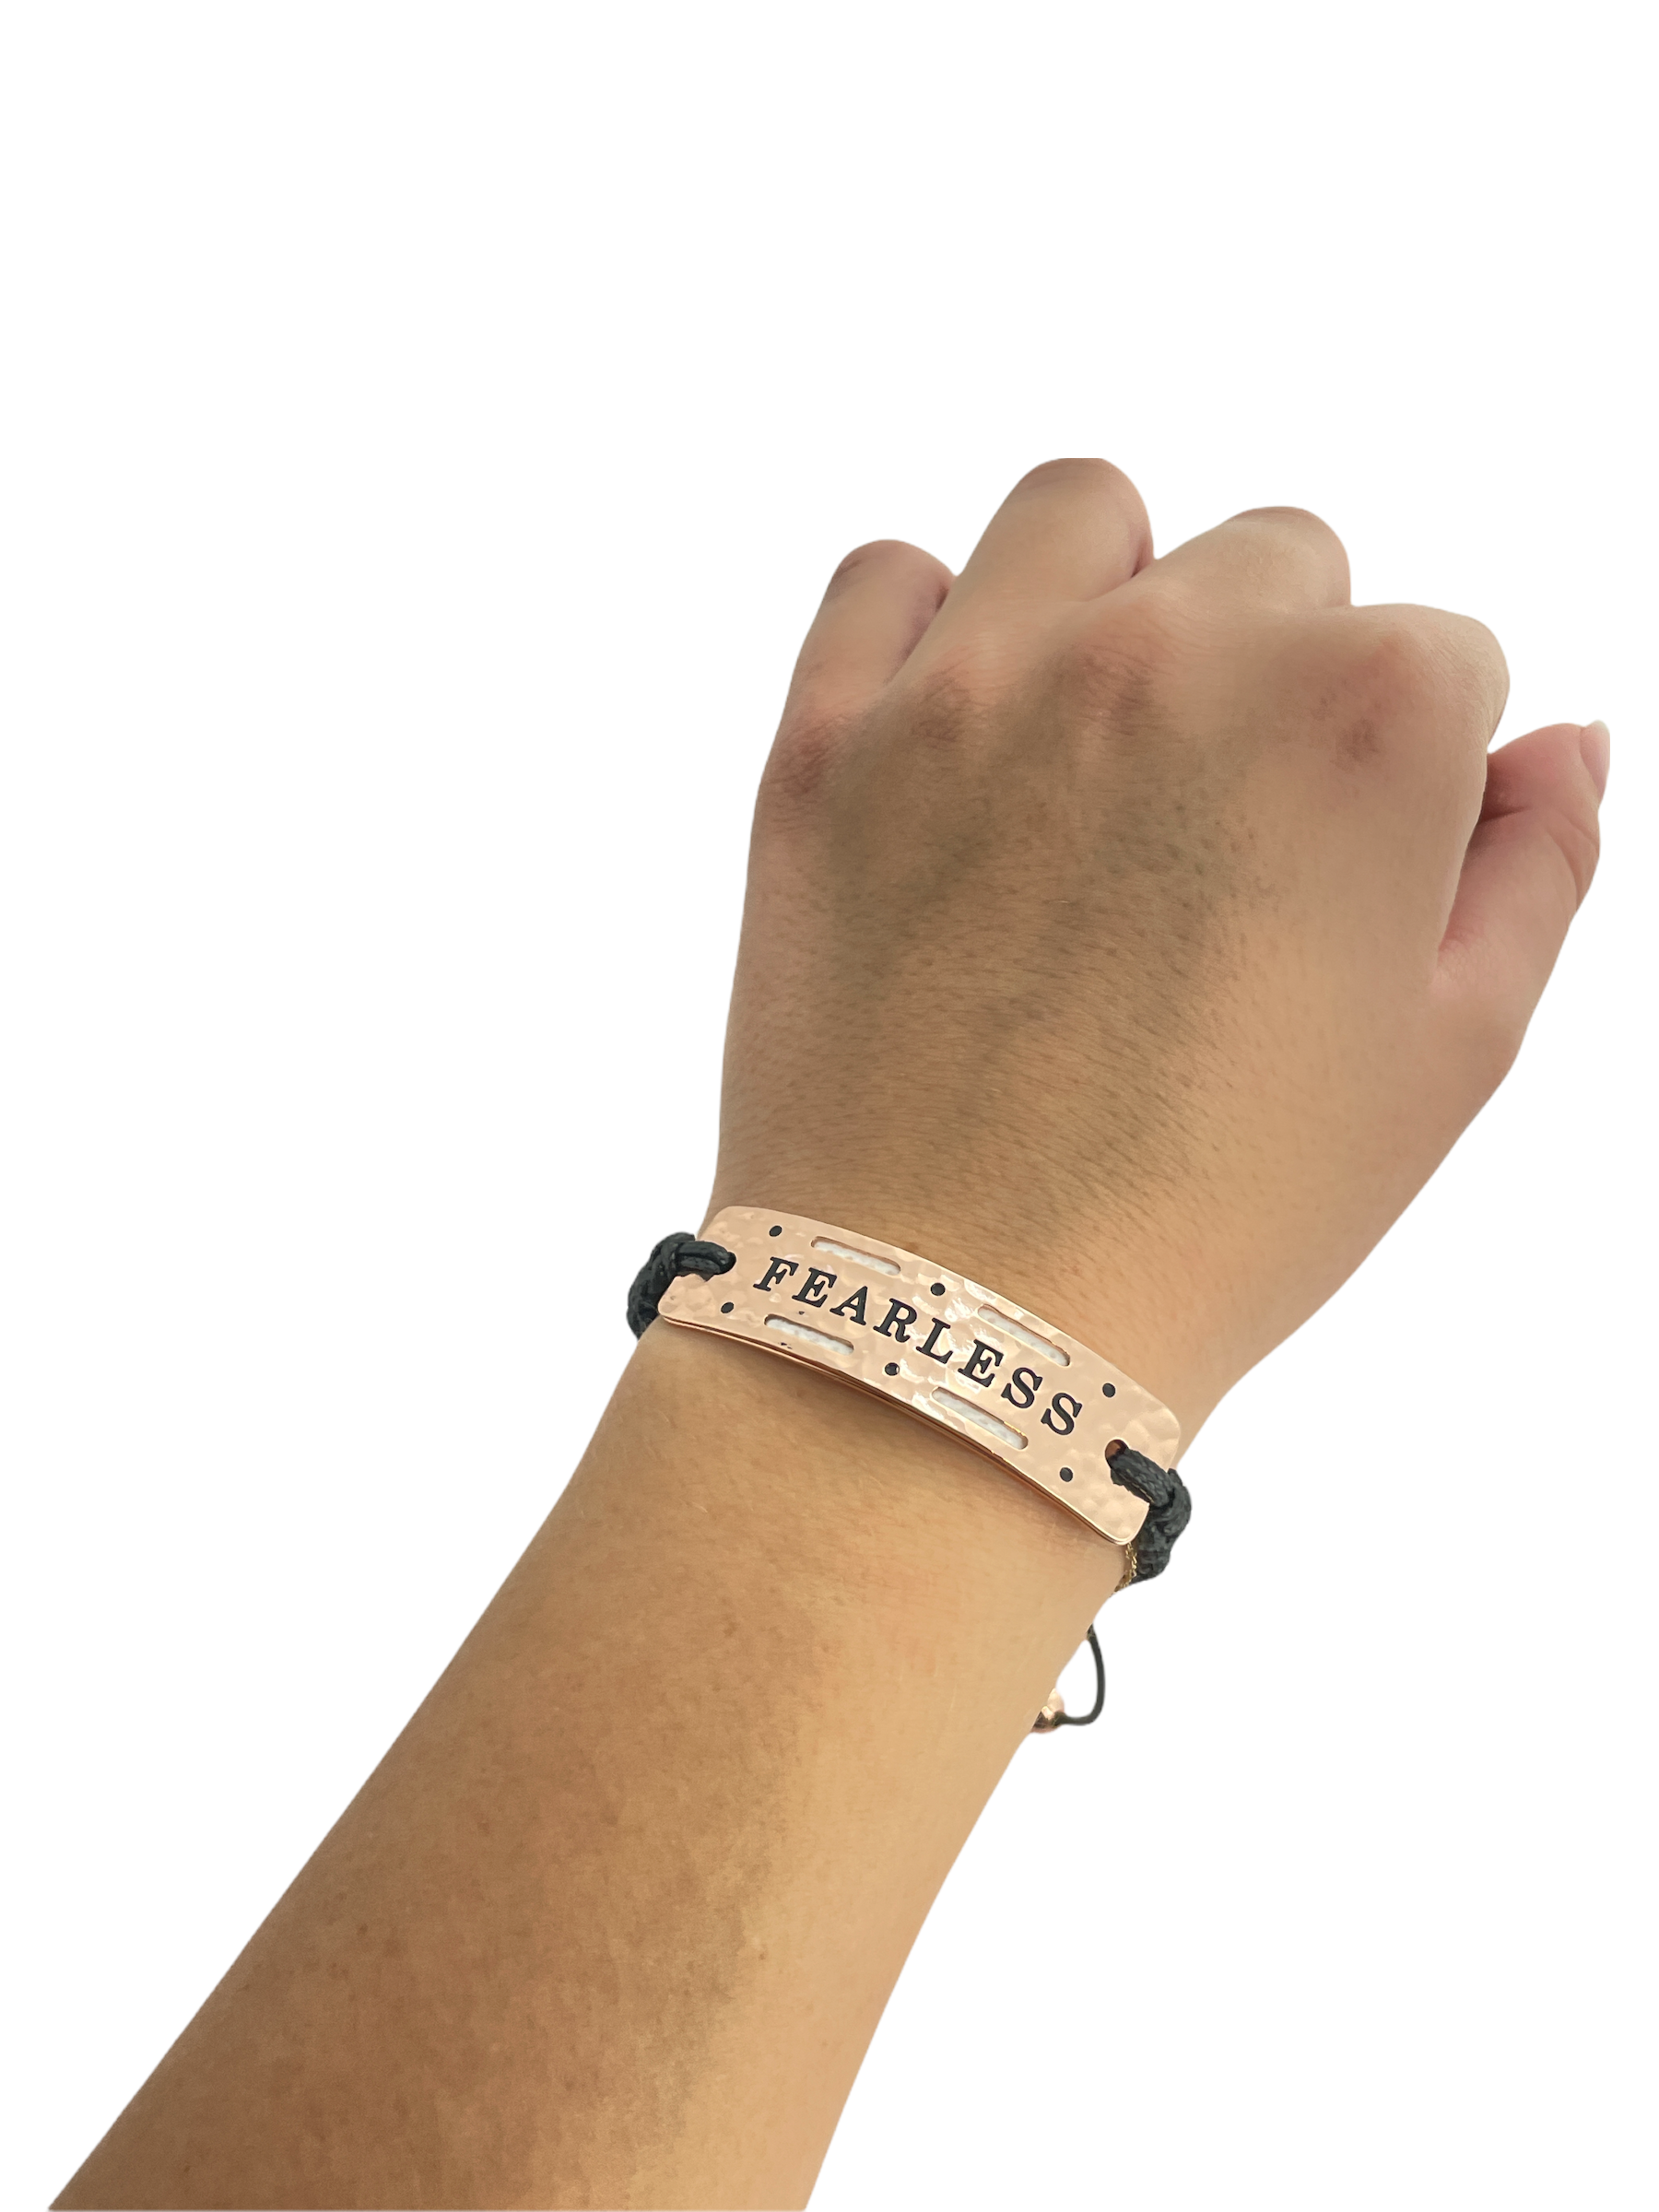 Fearless  - Vented Power Word Aromatherapy Diffuser Bracelet